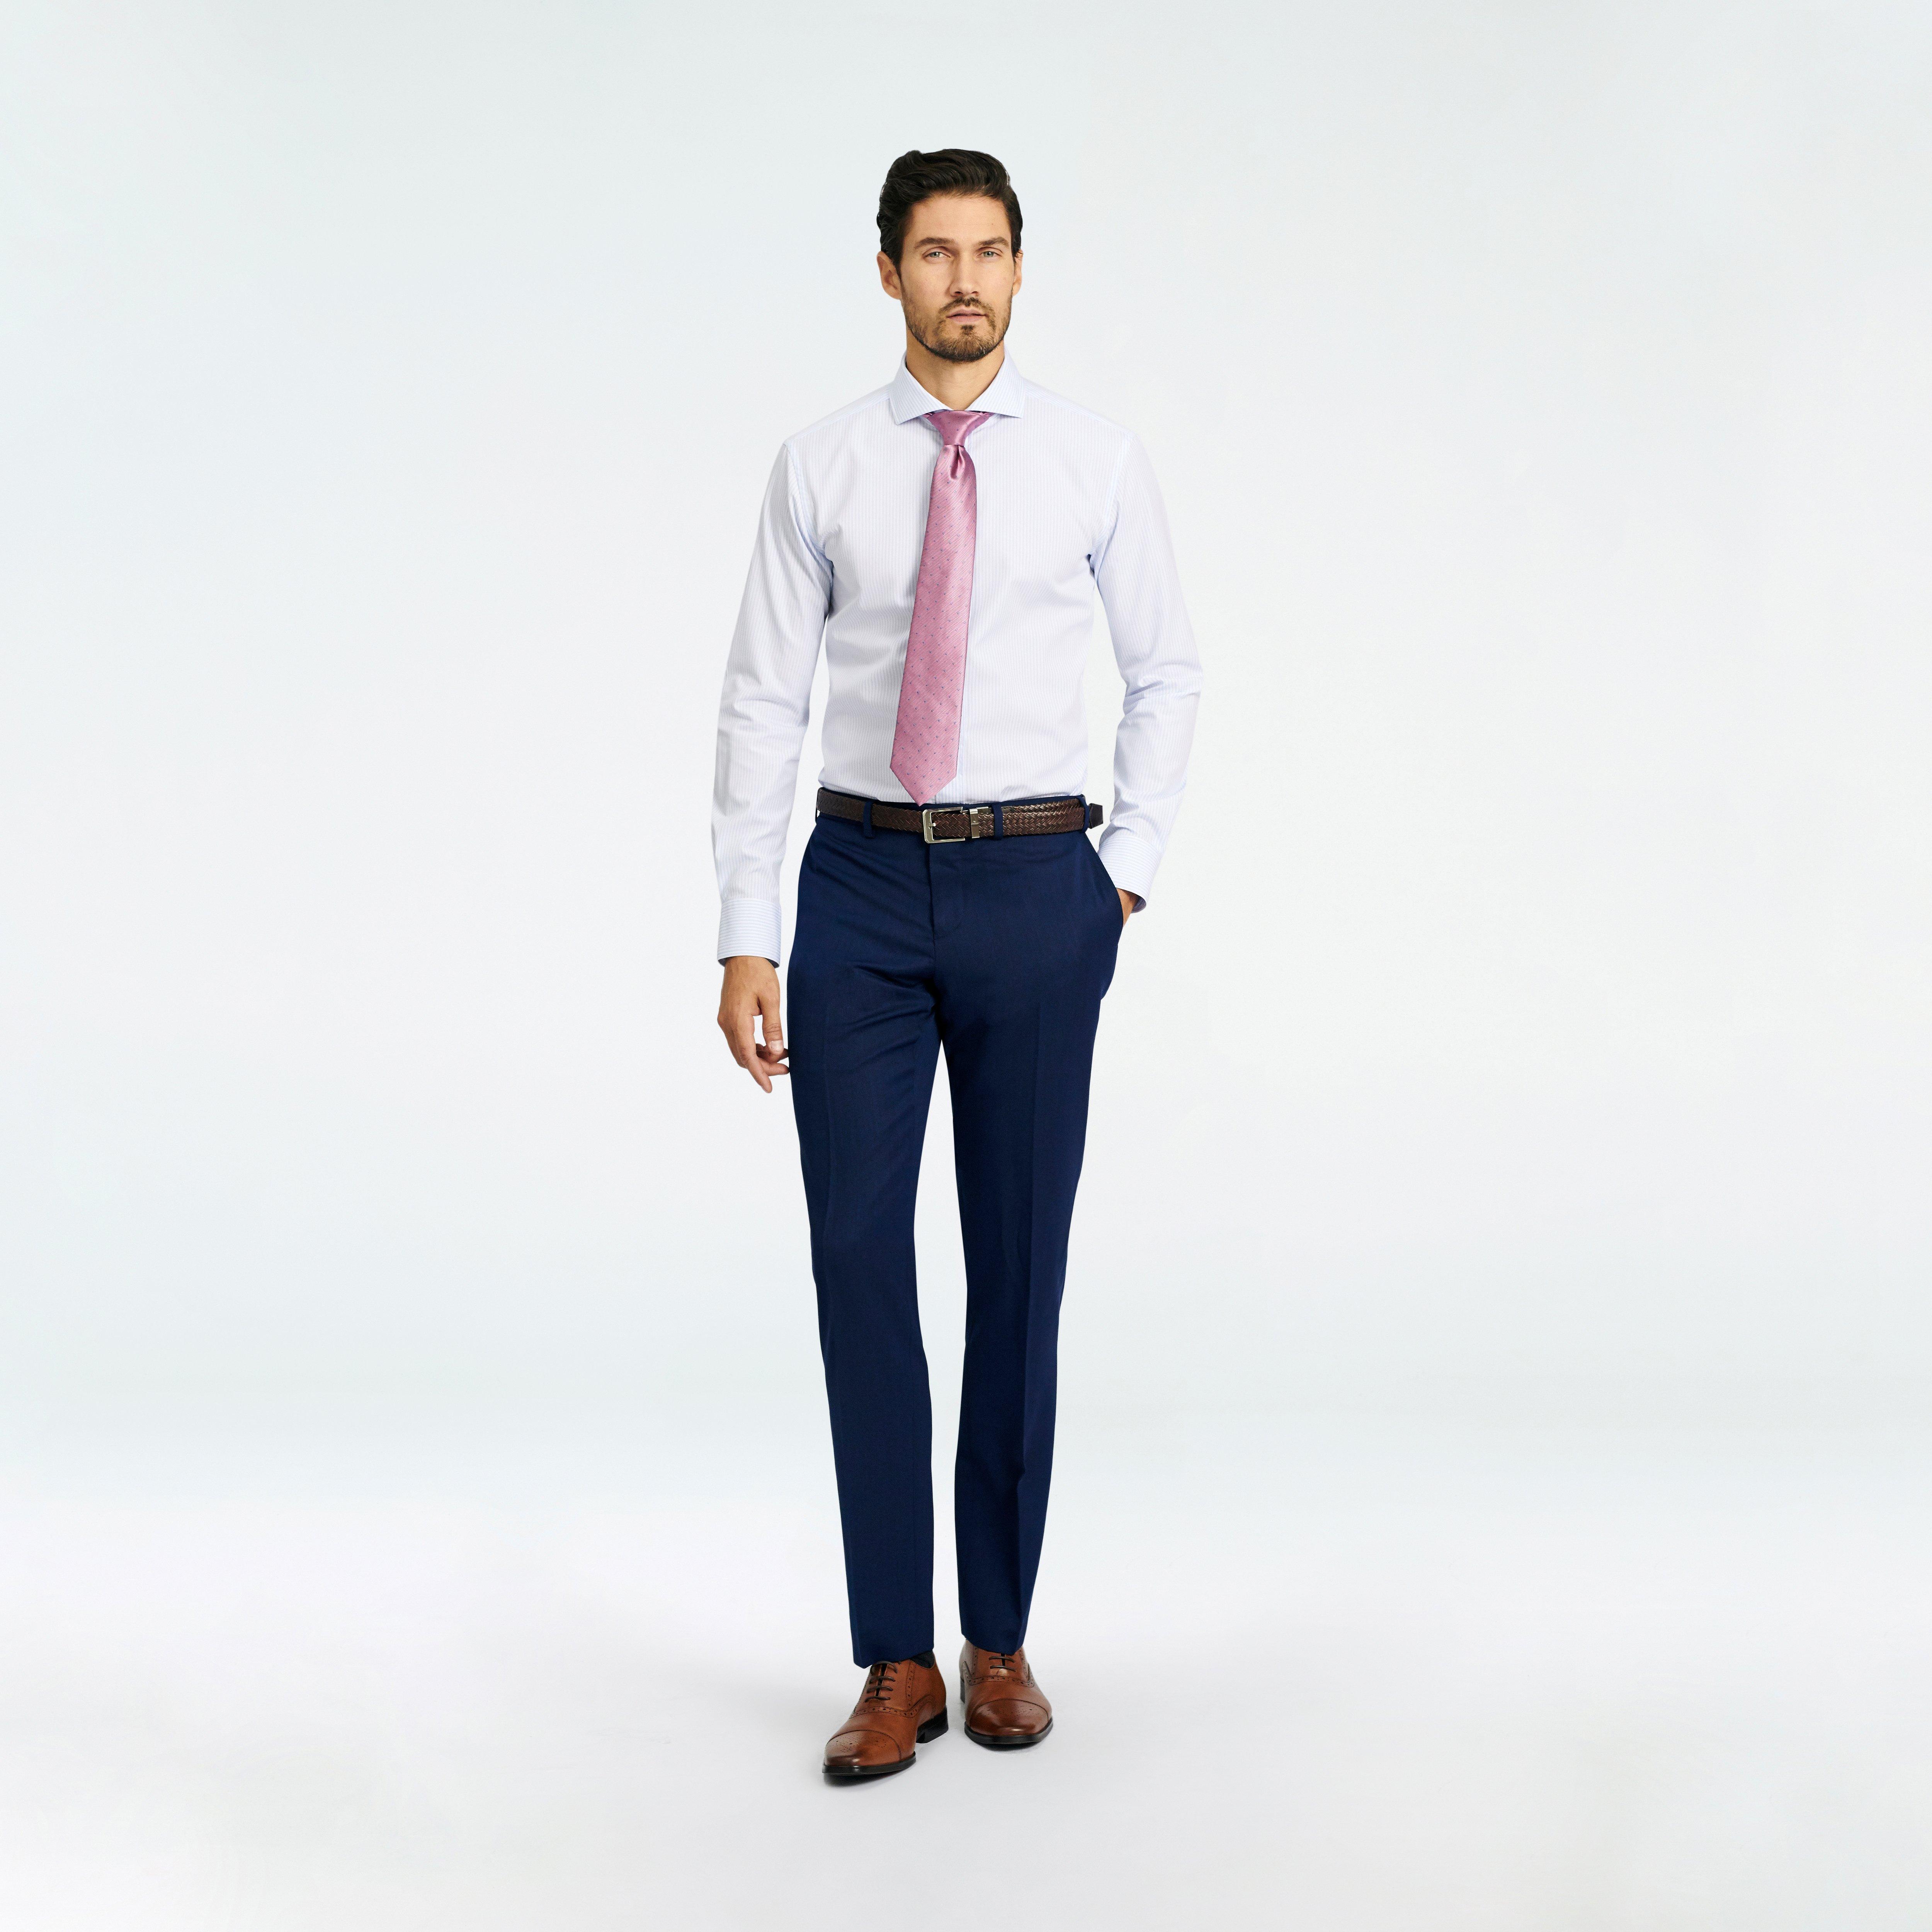 Custom Pants Made For You - Hereford Cavalry Twill Blue Pants | INDOCHINO